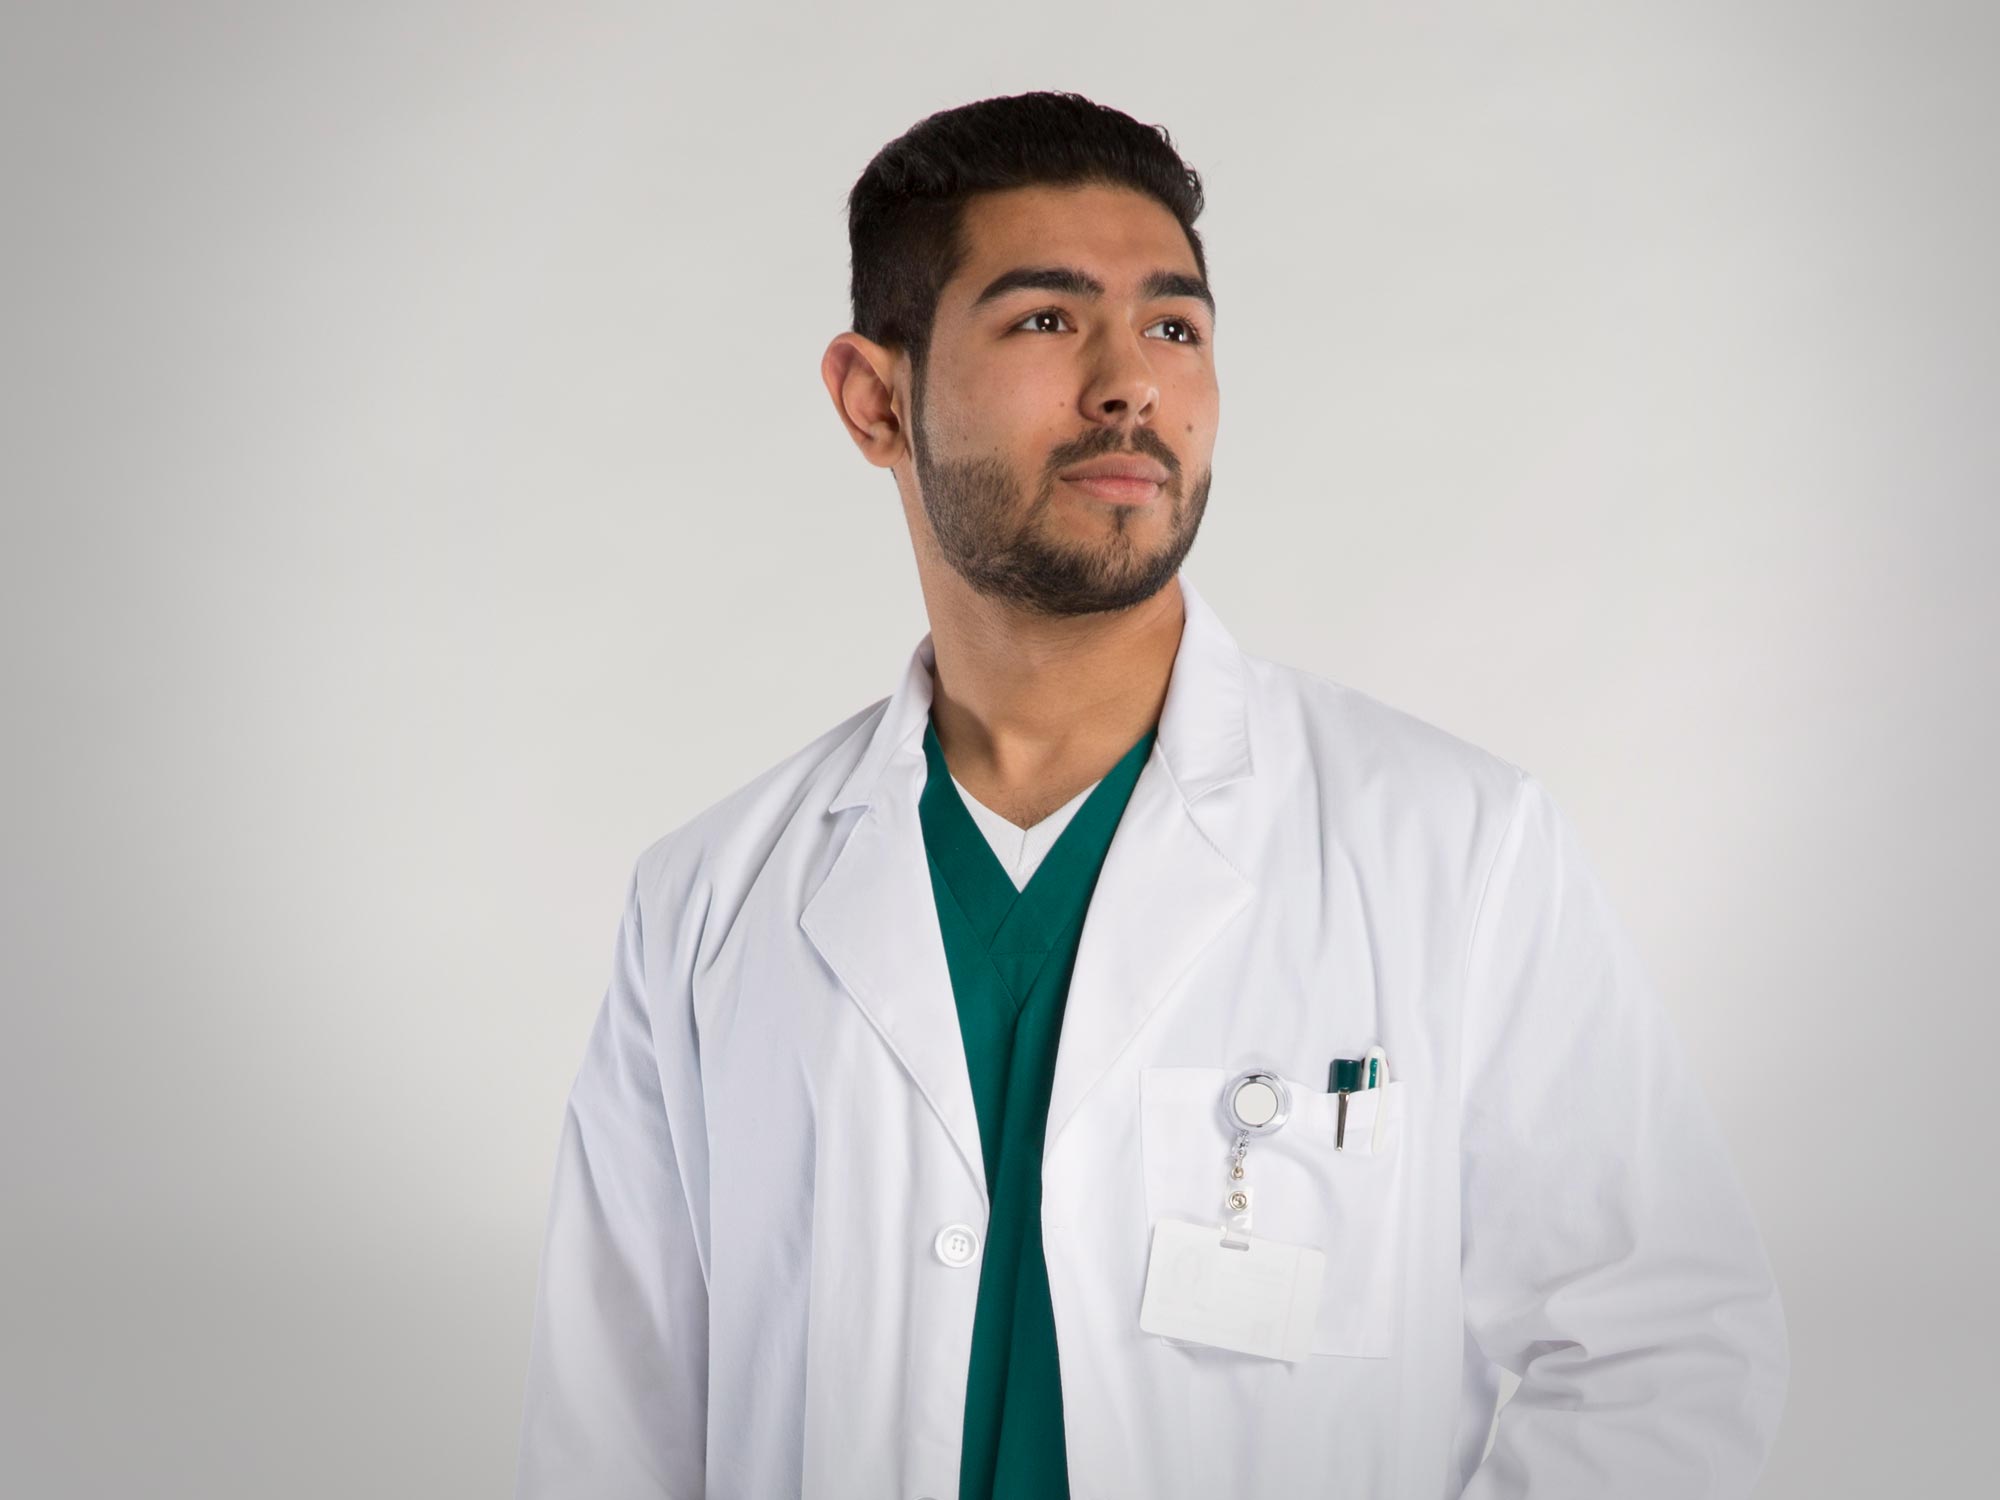 Male student in white medical lab coat